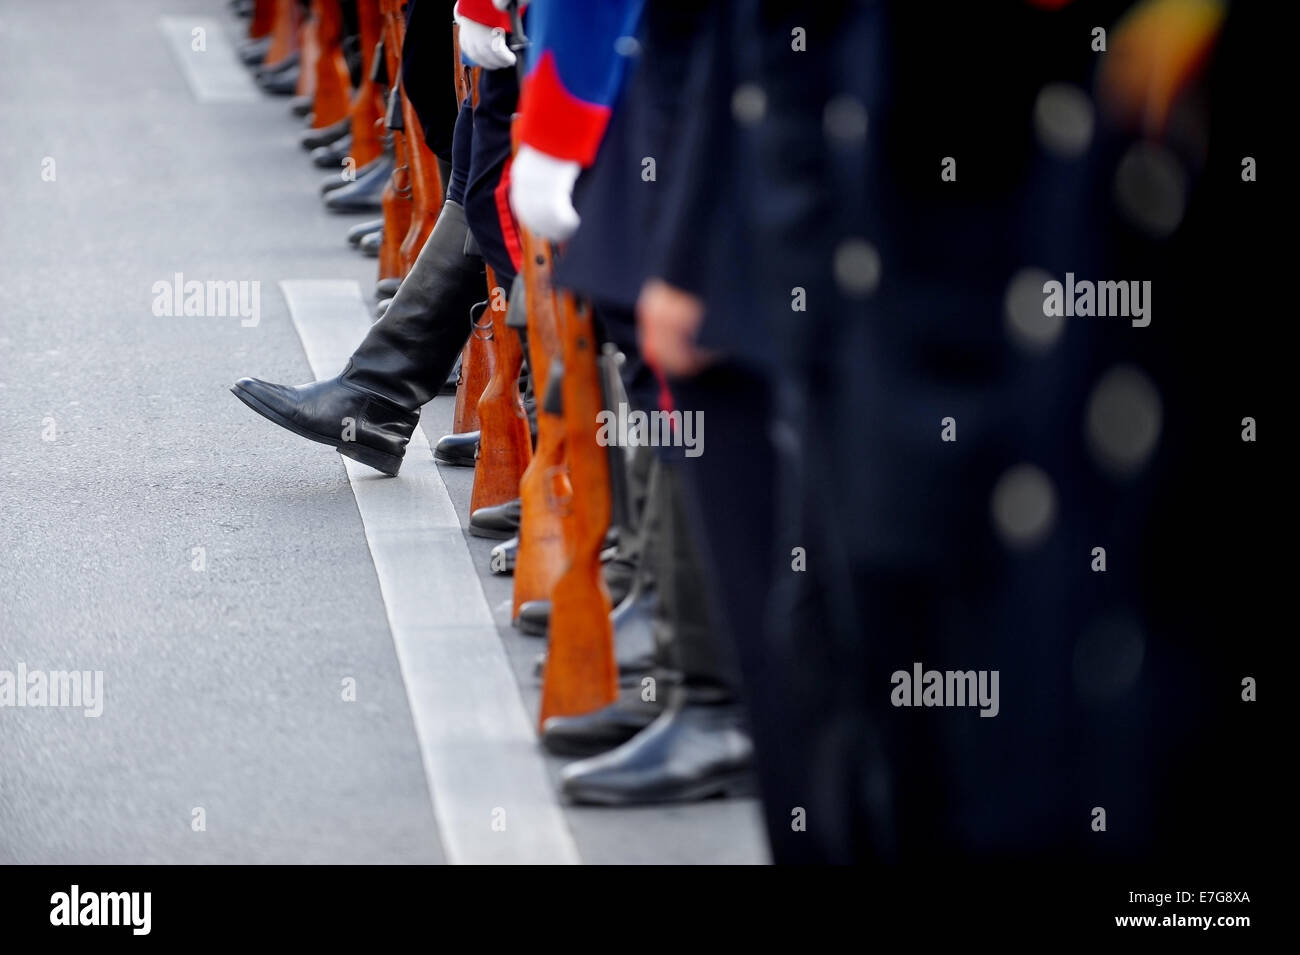 A soldier boot stands out from the line of rifle rest position during a military parade Stock Photo